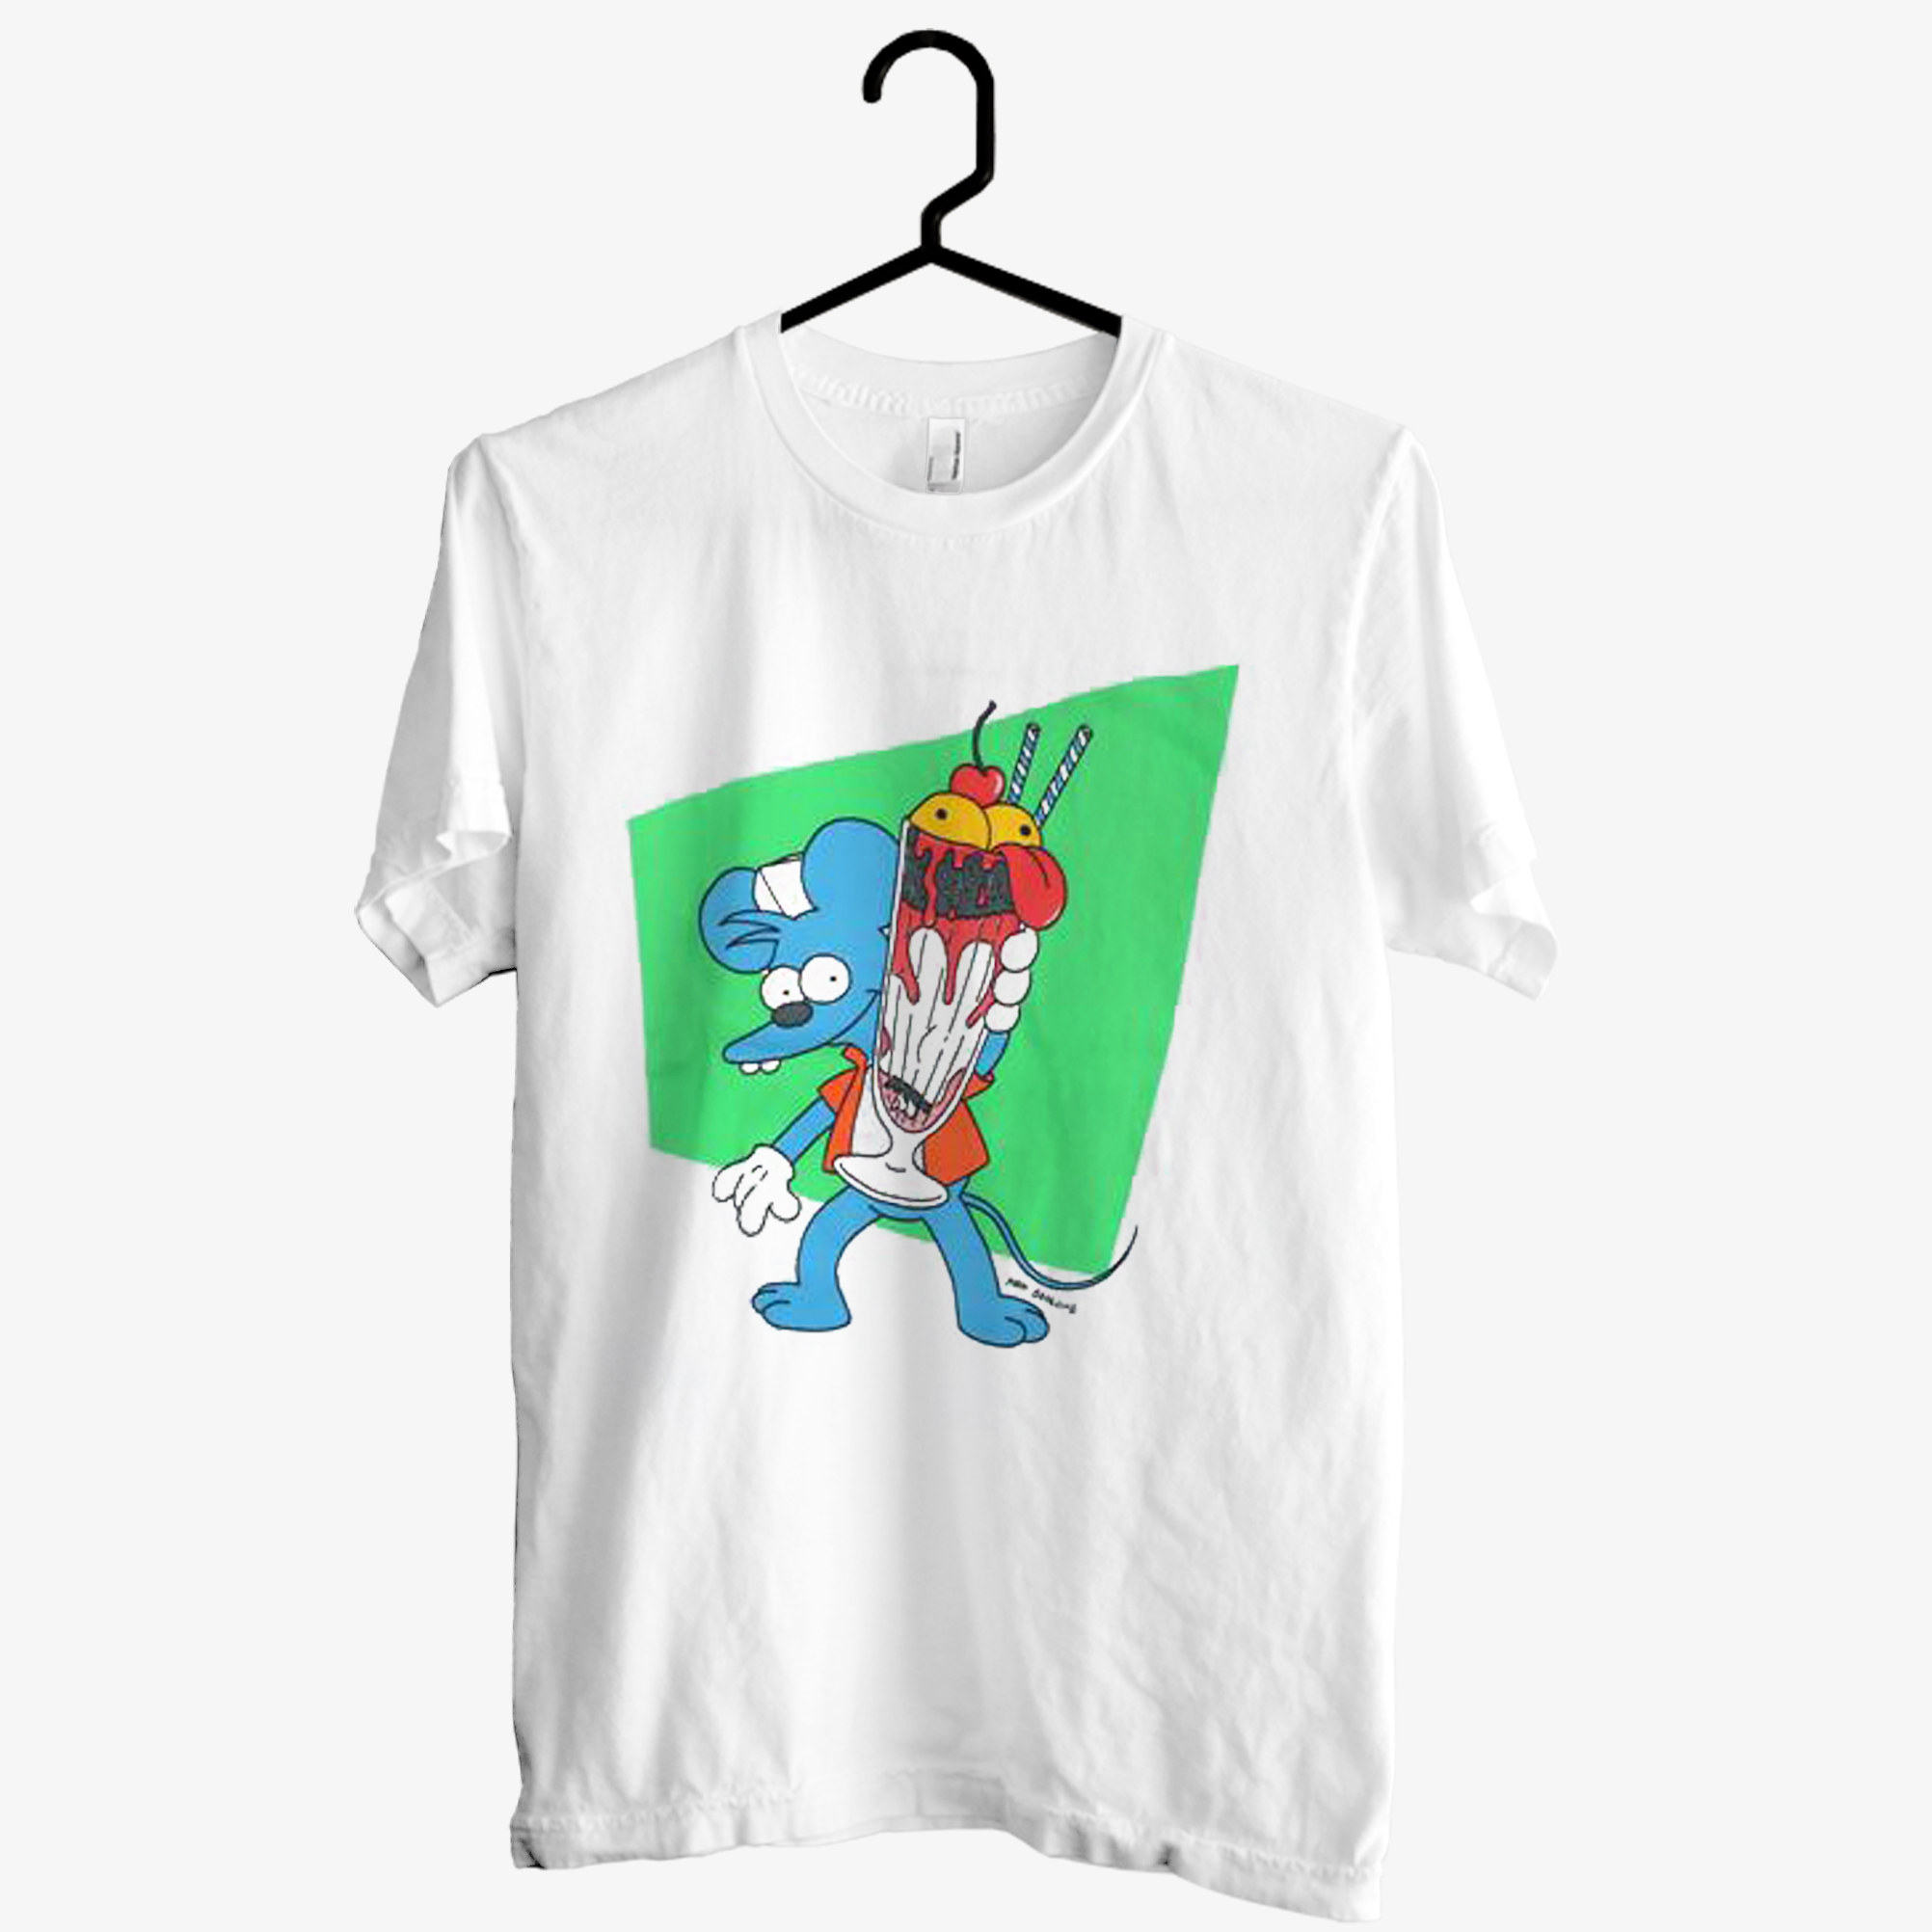 The Itchy And Scratchy T shirt